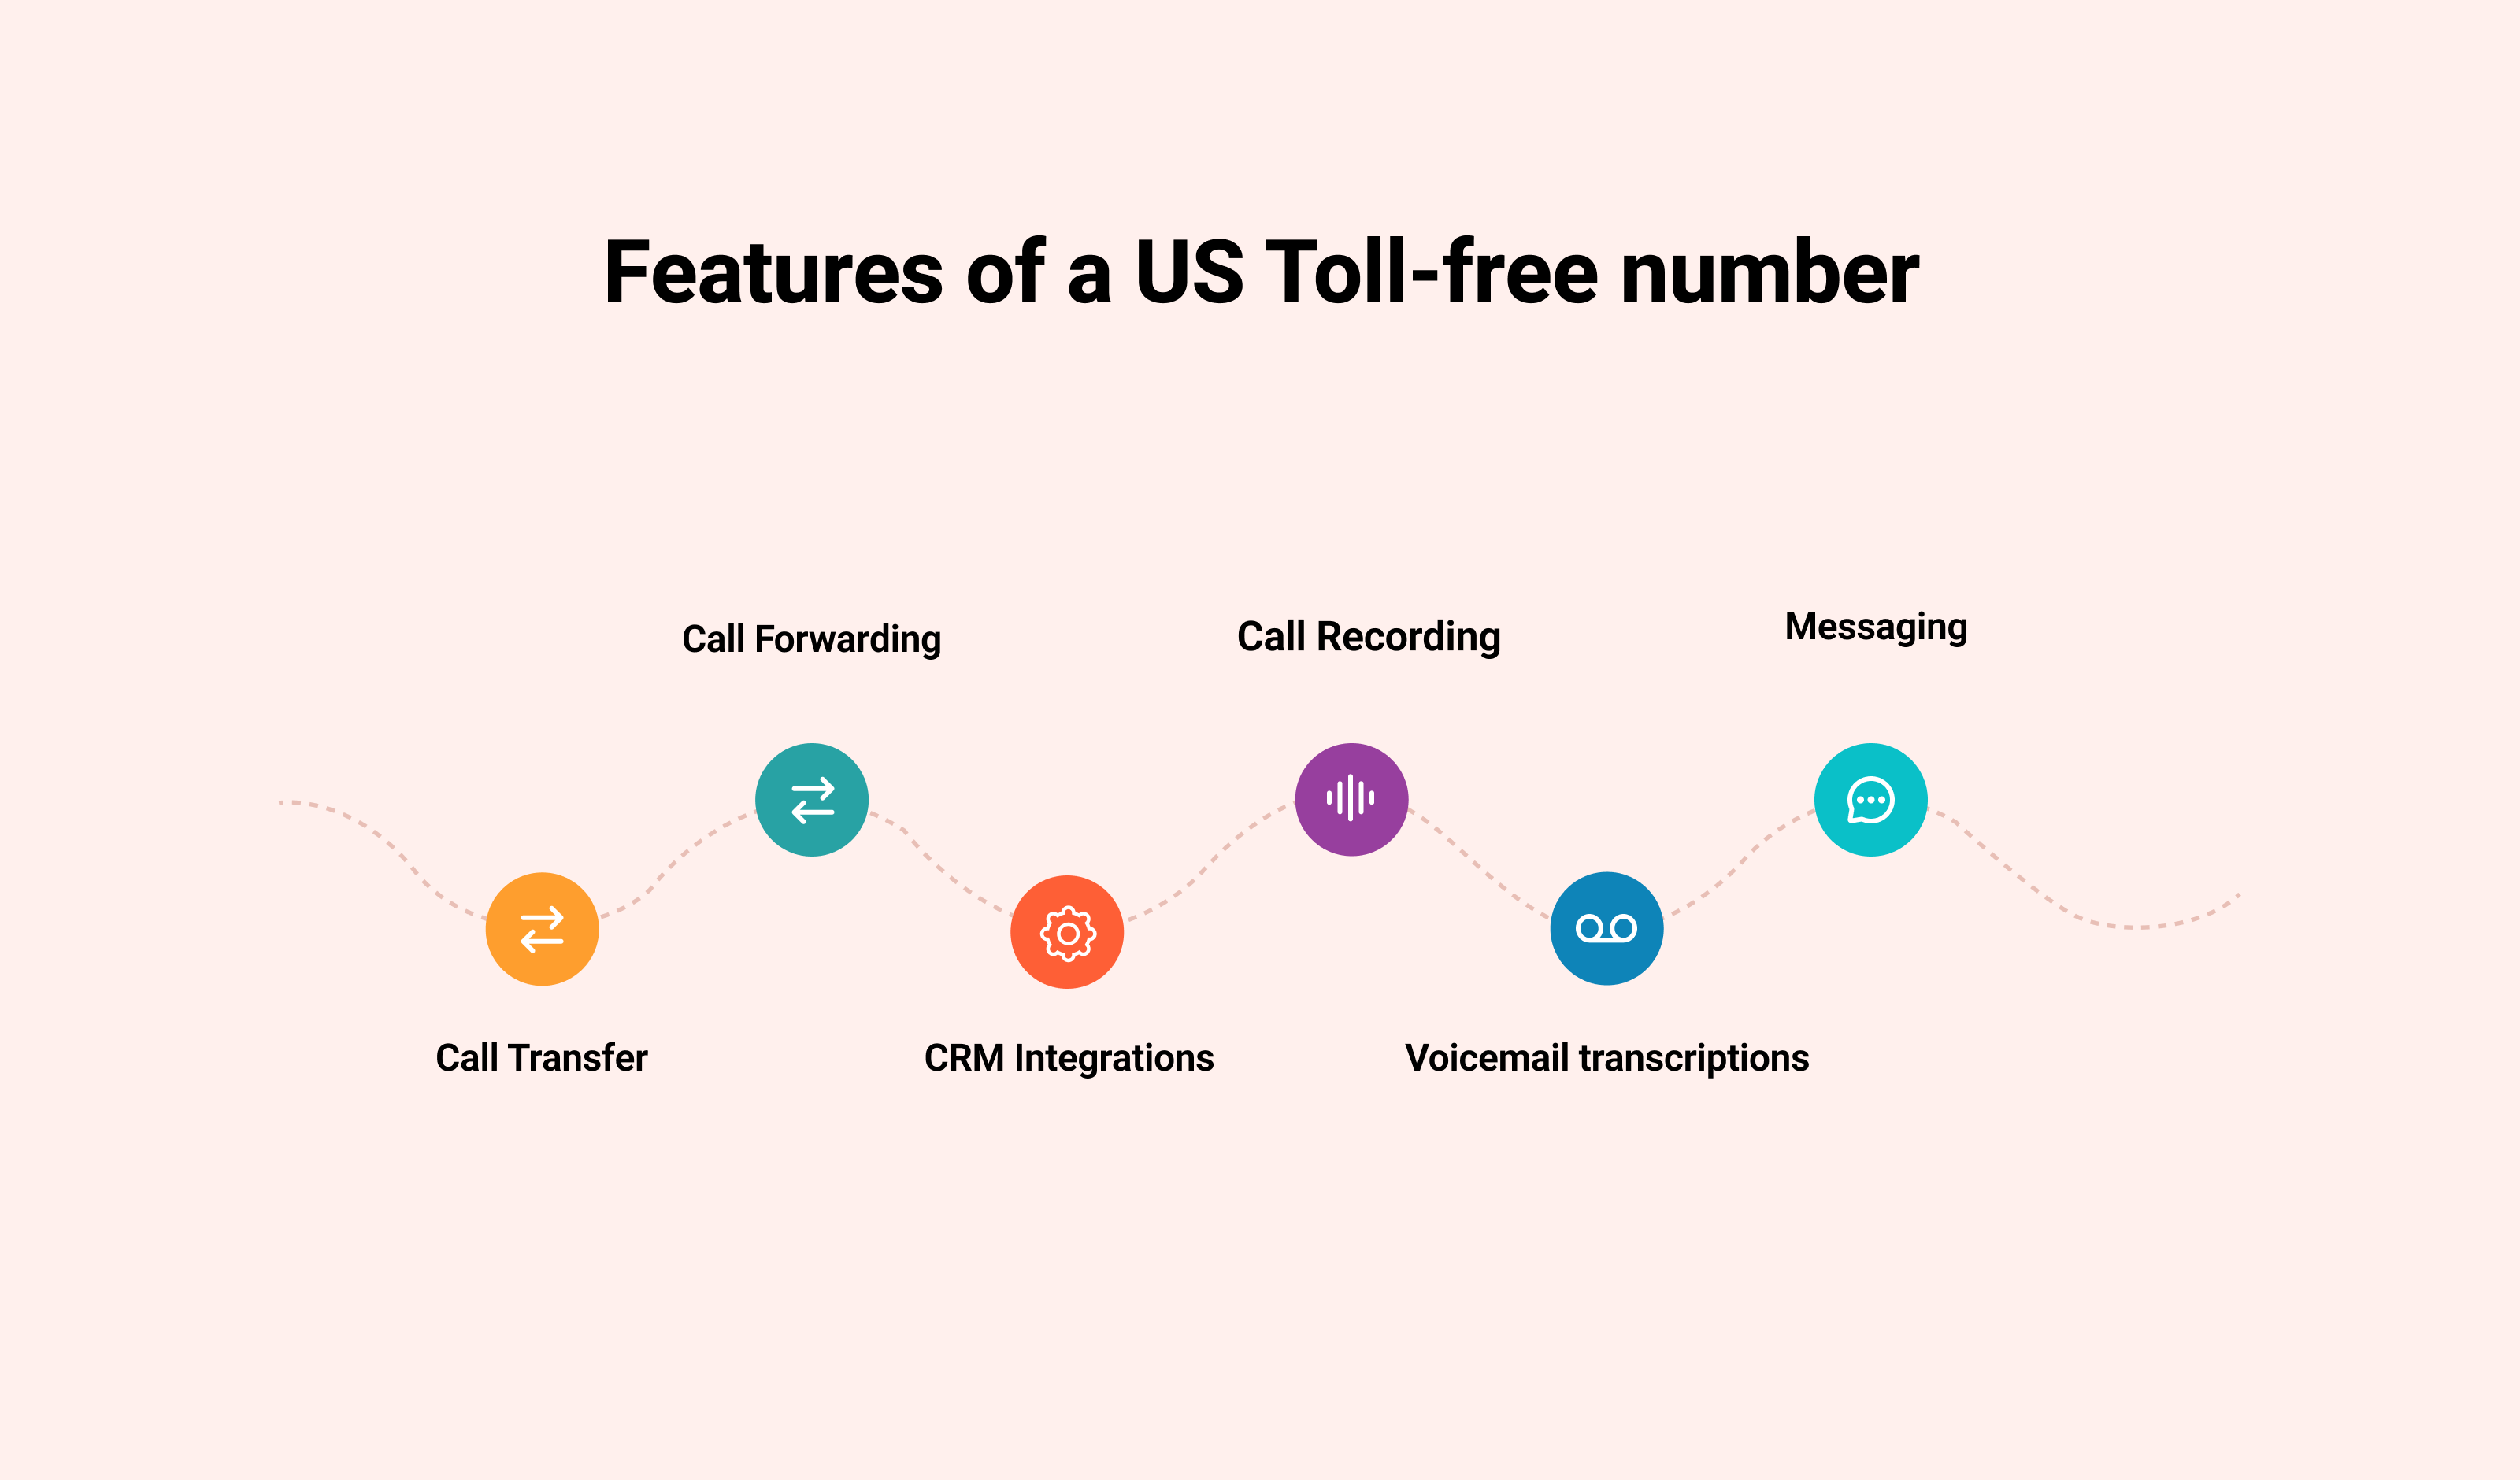 Features of a US Toll-free number: